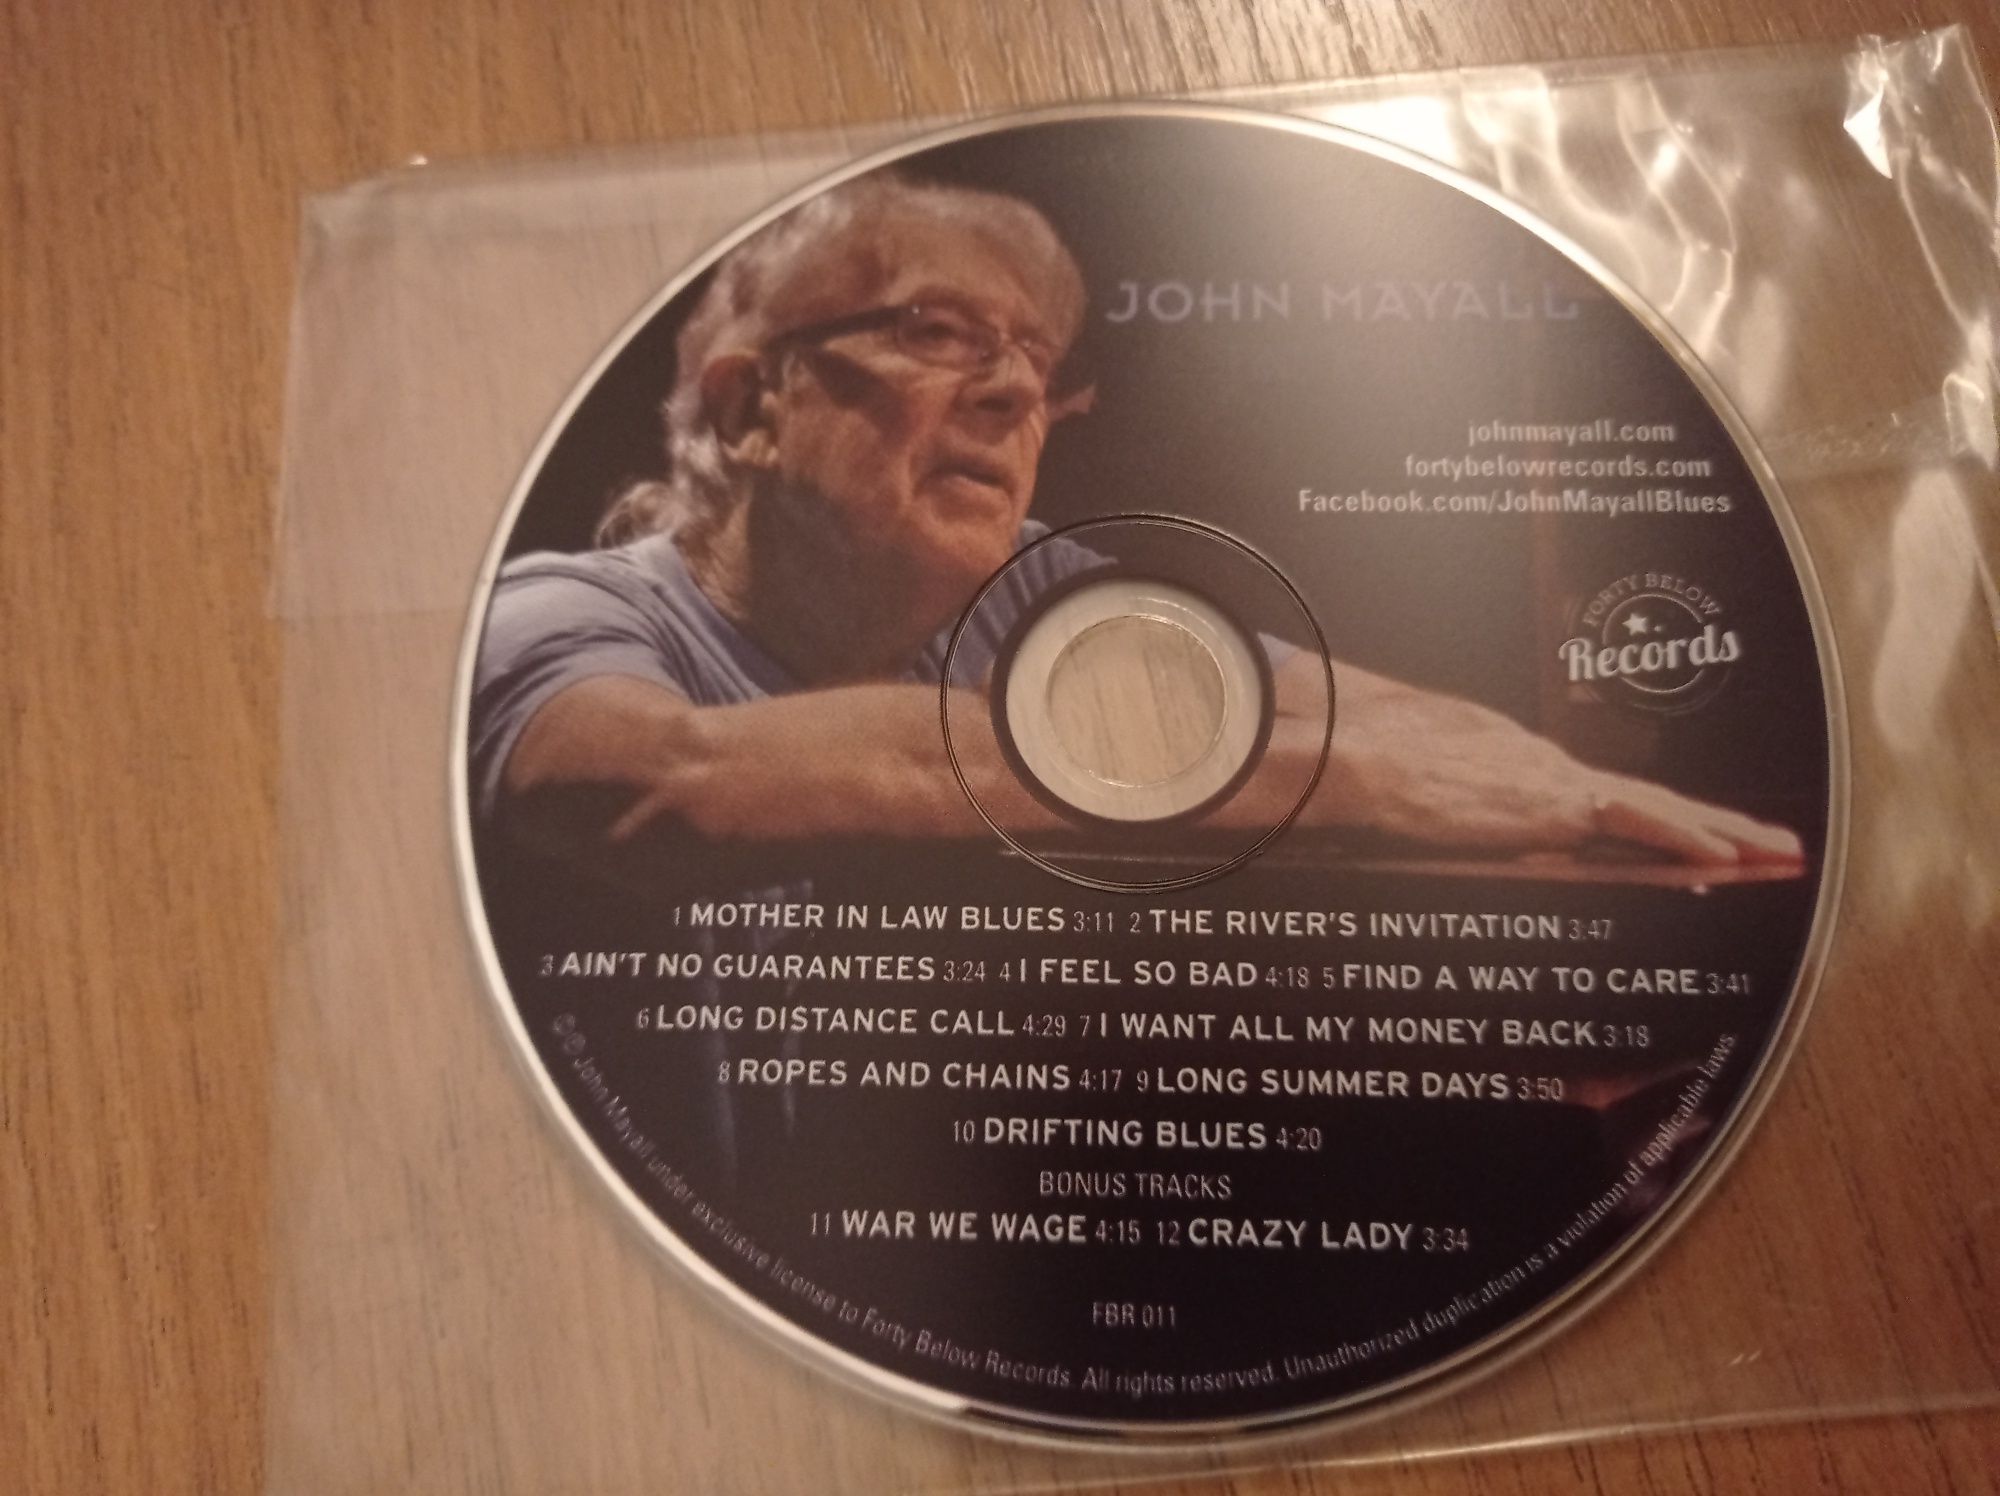 John Mayall - Find a way to care